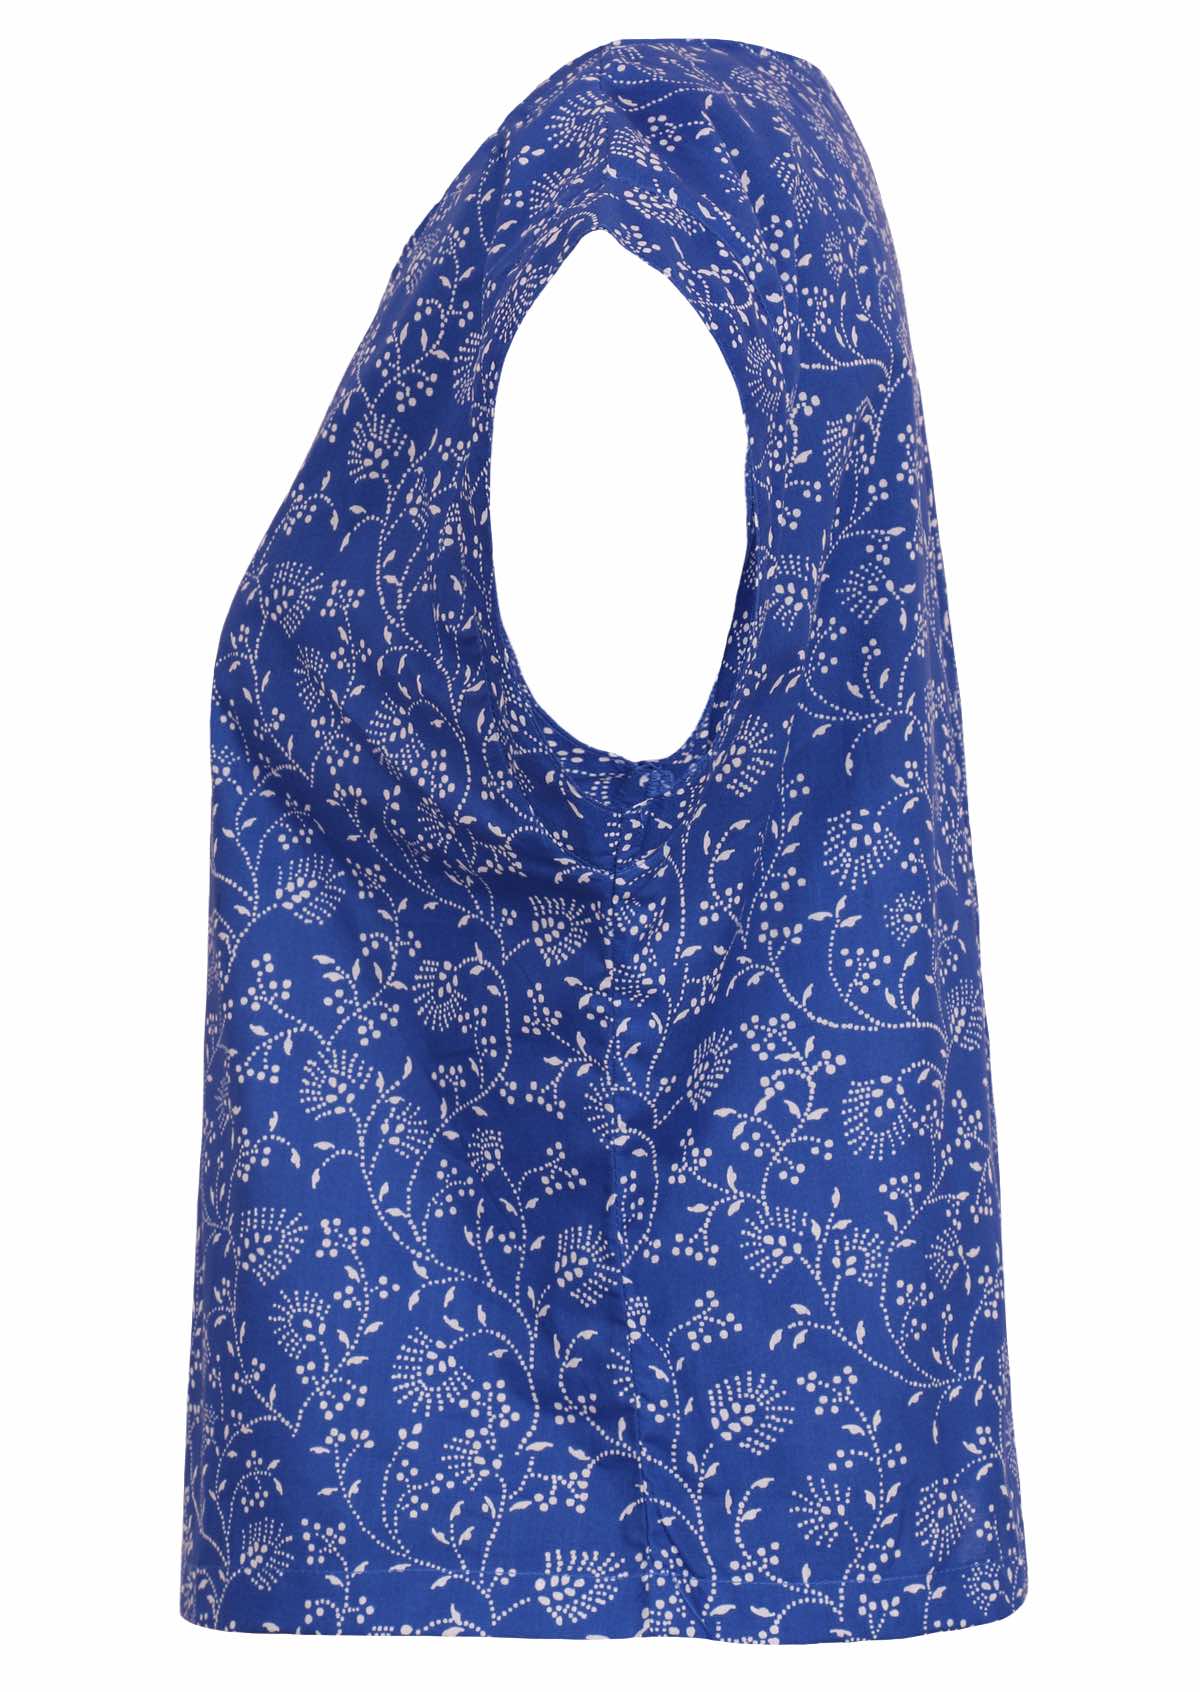 Blue based cotton top has a delicate floral pattern and cap sleeves. 